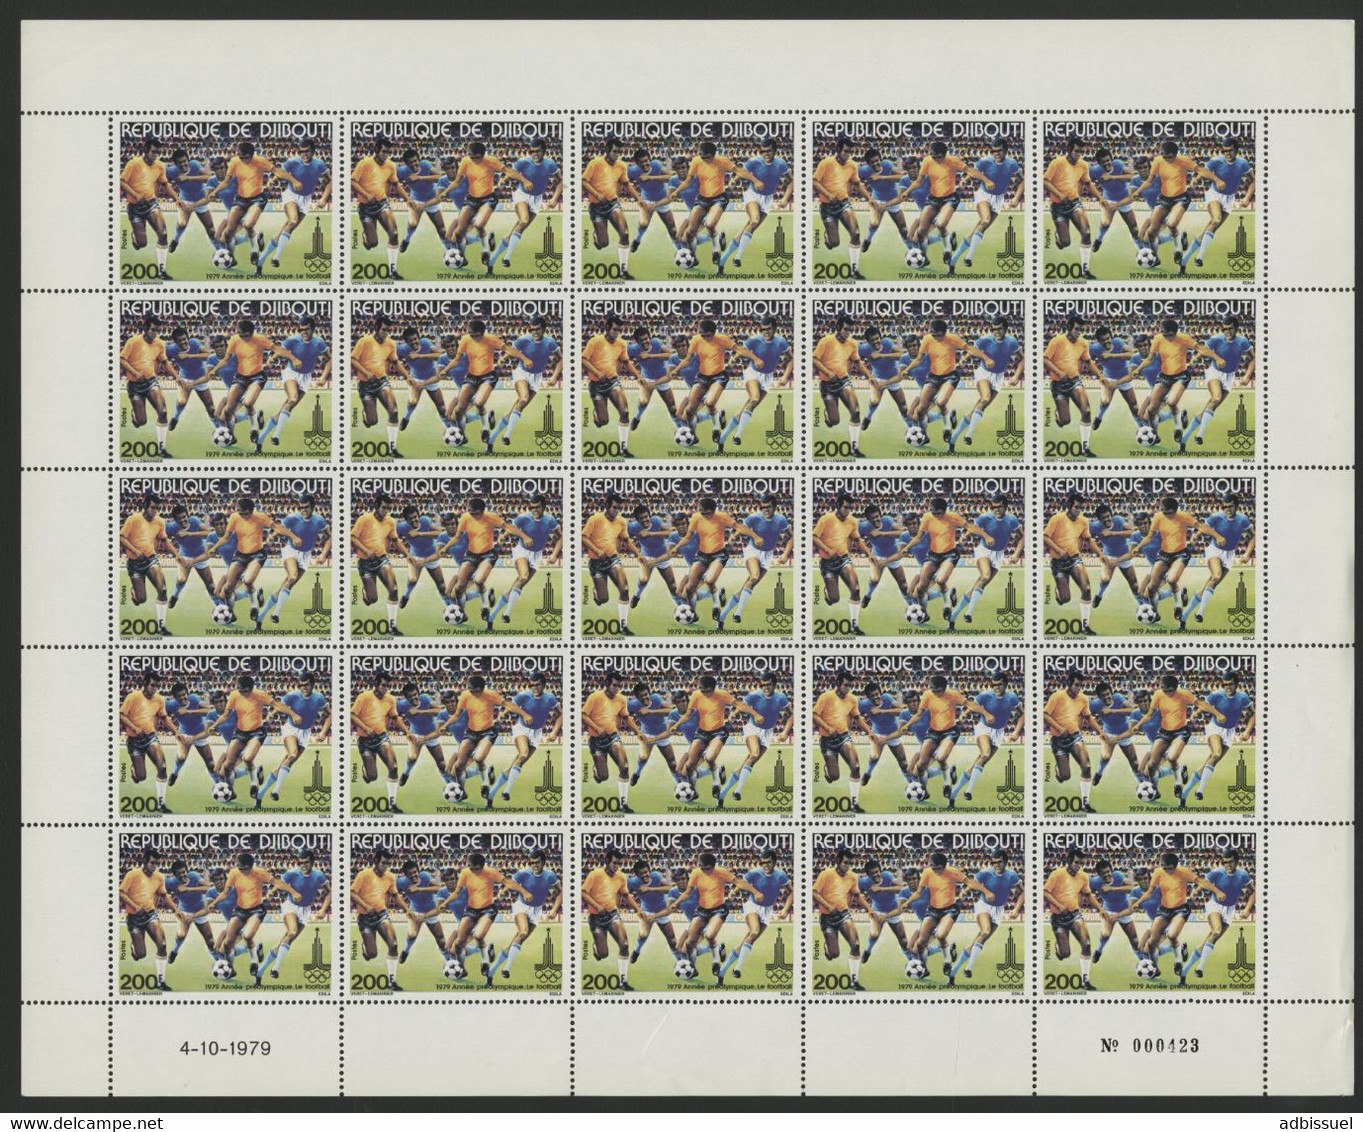 DJIBOUTI N° 511 COTE 106,25 € FEUILLE De 25 Ex. MNH ** ANNEE PREOLYMPIQUE OLYMPIC FOOTBALL SOCCER - Sommer 1980: Moskau